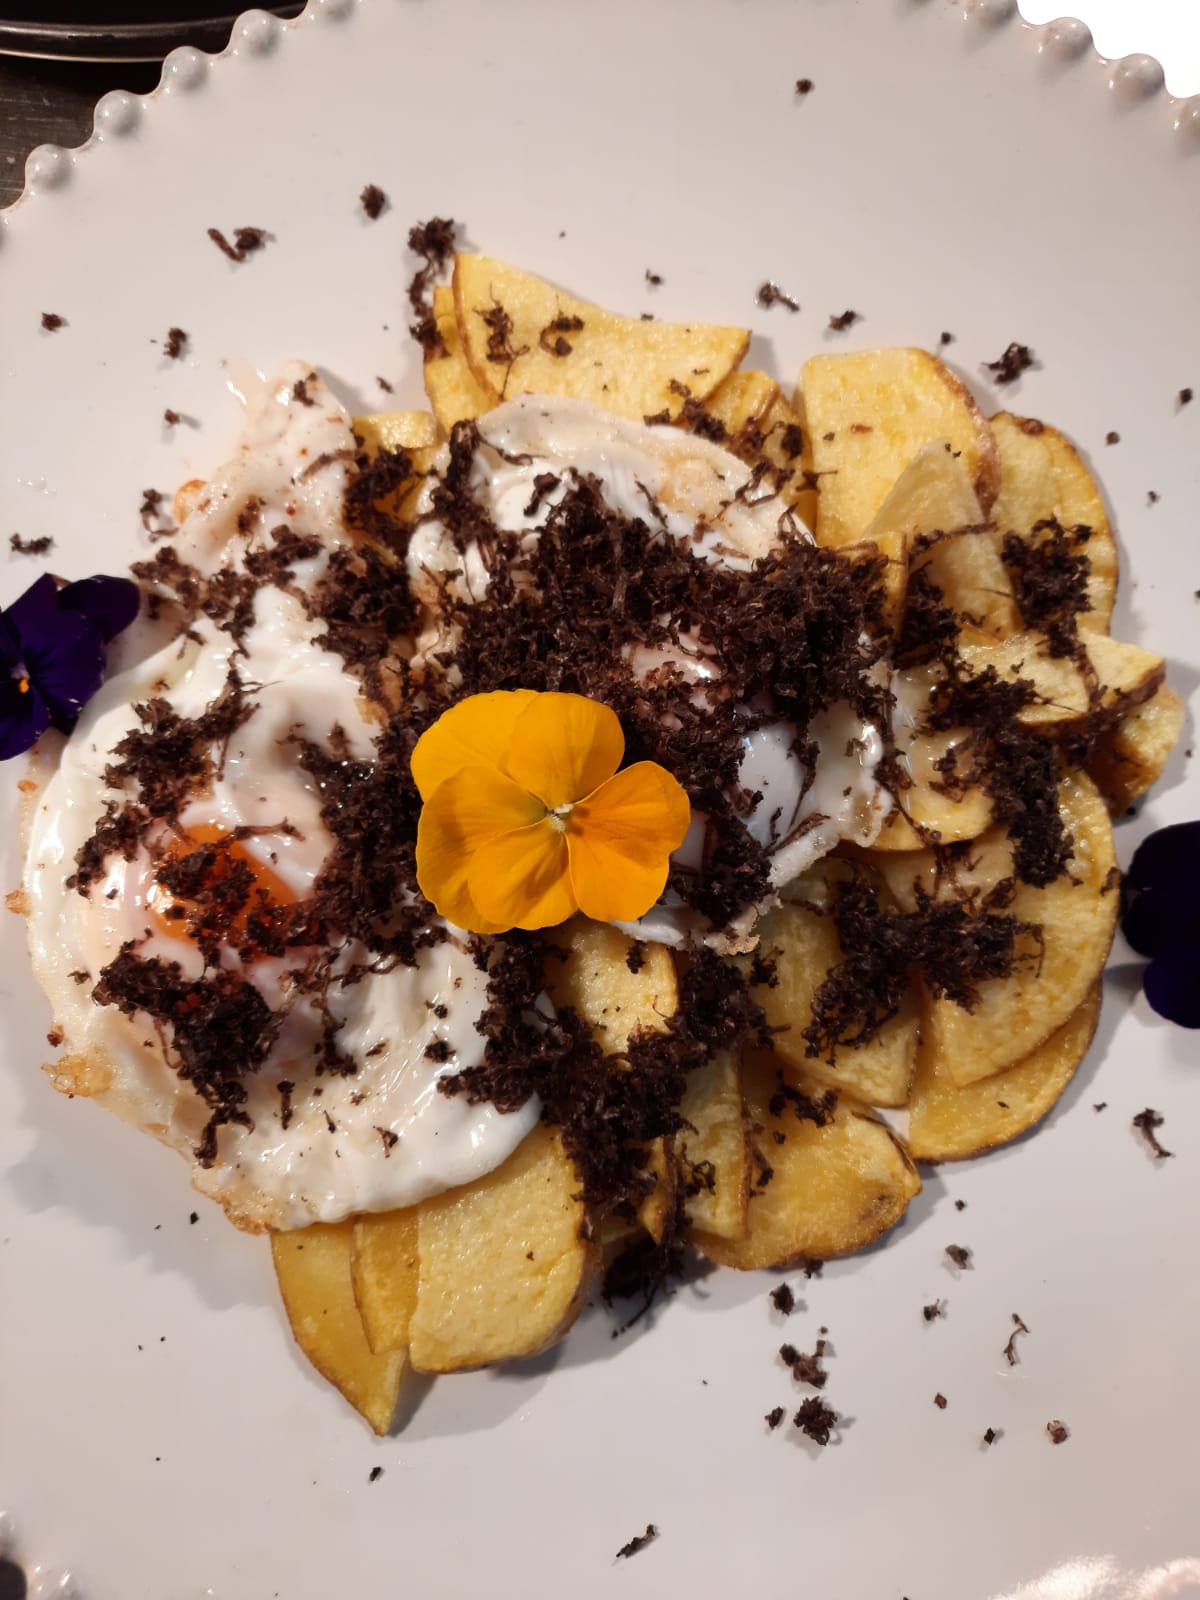 Fried eggs with Black Truffle